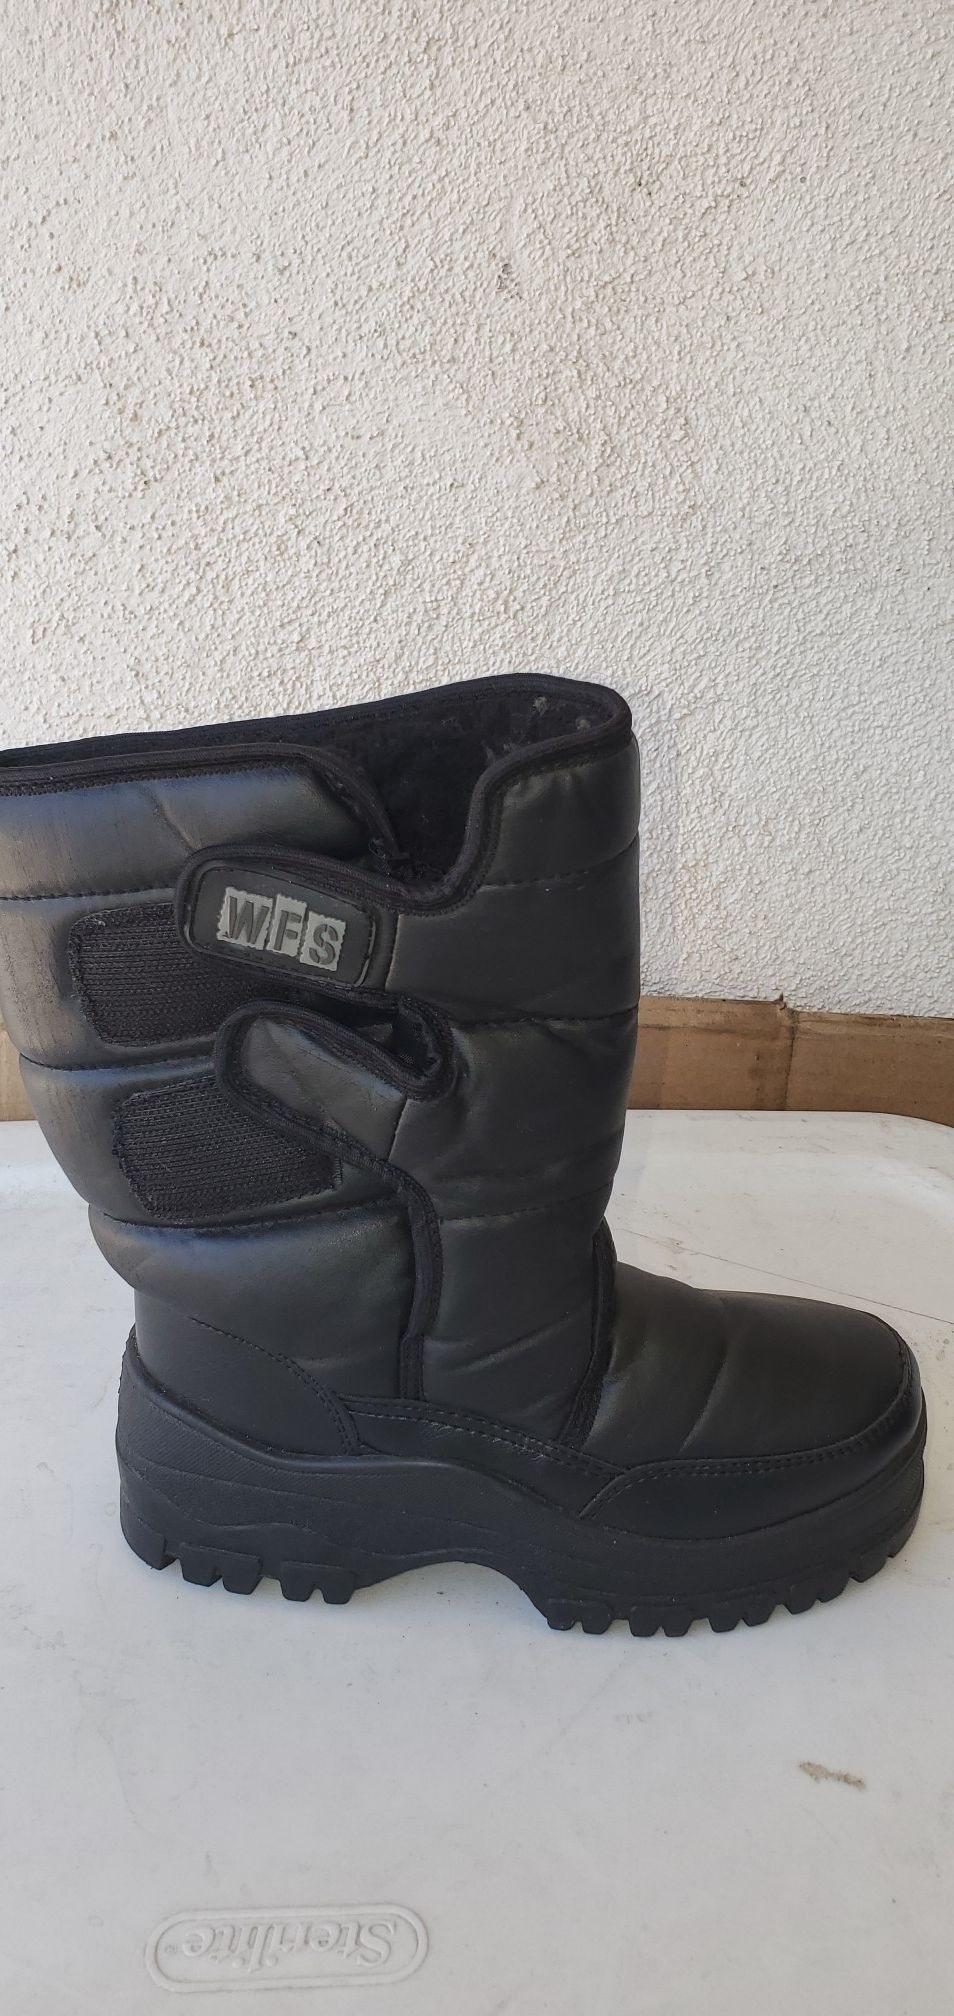 WFS WINTER SNOW BOOTS KIDS (SIZE 2 ) PRE-OWNED IN GOOD CONDITION